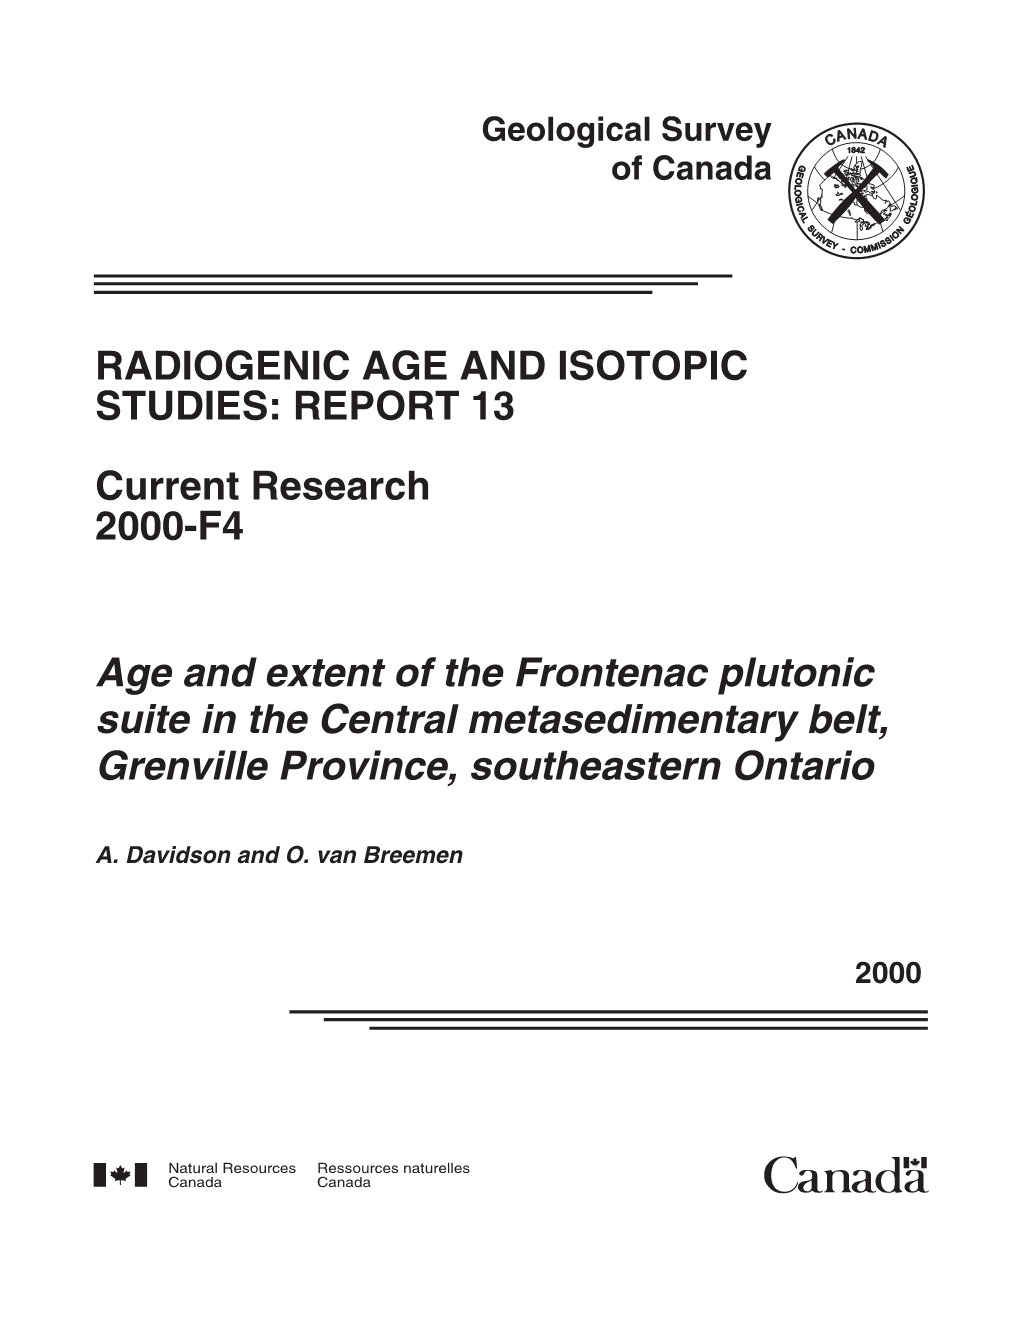 Age and Extent of the Frontenac Plutonic Suite in the Central Metasedimentary Belt, Grenville Province, Southeastern Ontario